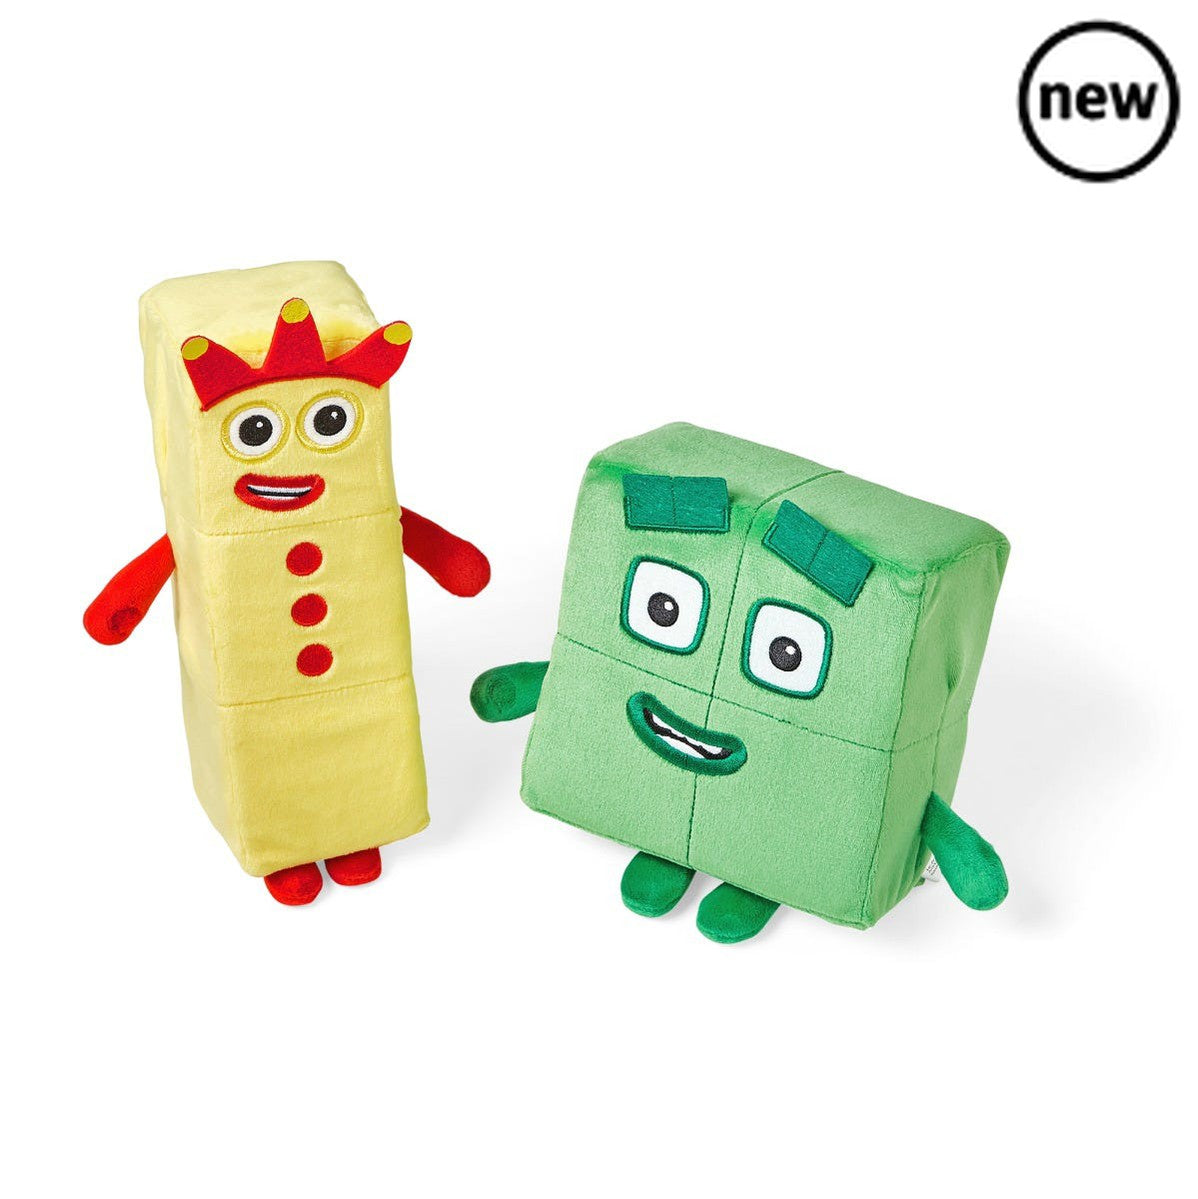 Numberblocks Three and Four Playful Pals, These Numberblocks Playful Pals are ready for play adventures in Numberland! Young fans of the TV series will love hugging and cuddling Numberblocks Three and Numberblocks Four Playful Pals and taking them on lots of imaginative play adventures. Thanks to their hook and loop fastenings, these two fun friends hold hands, and their huggable size make them perfect for naptime snuggles. Numberblock Three and Numberblock Four are ready for big imaginative play adventures